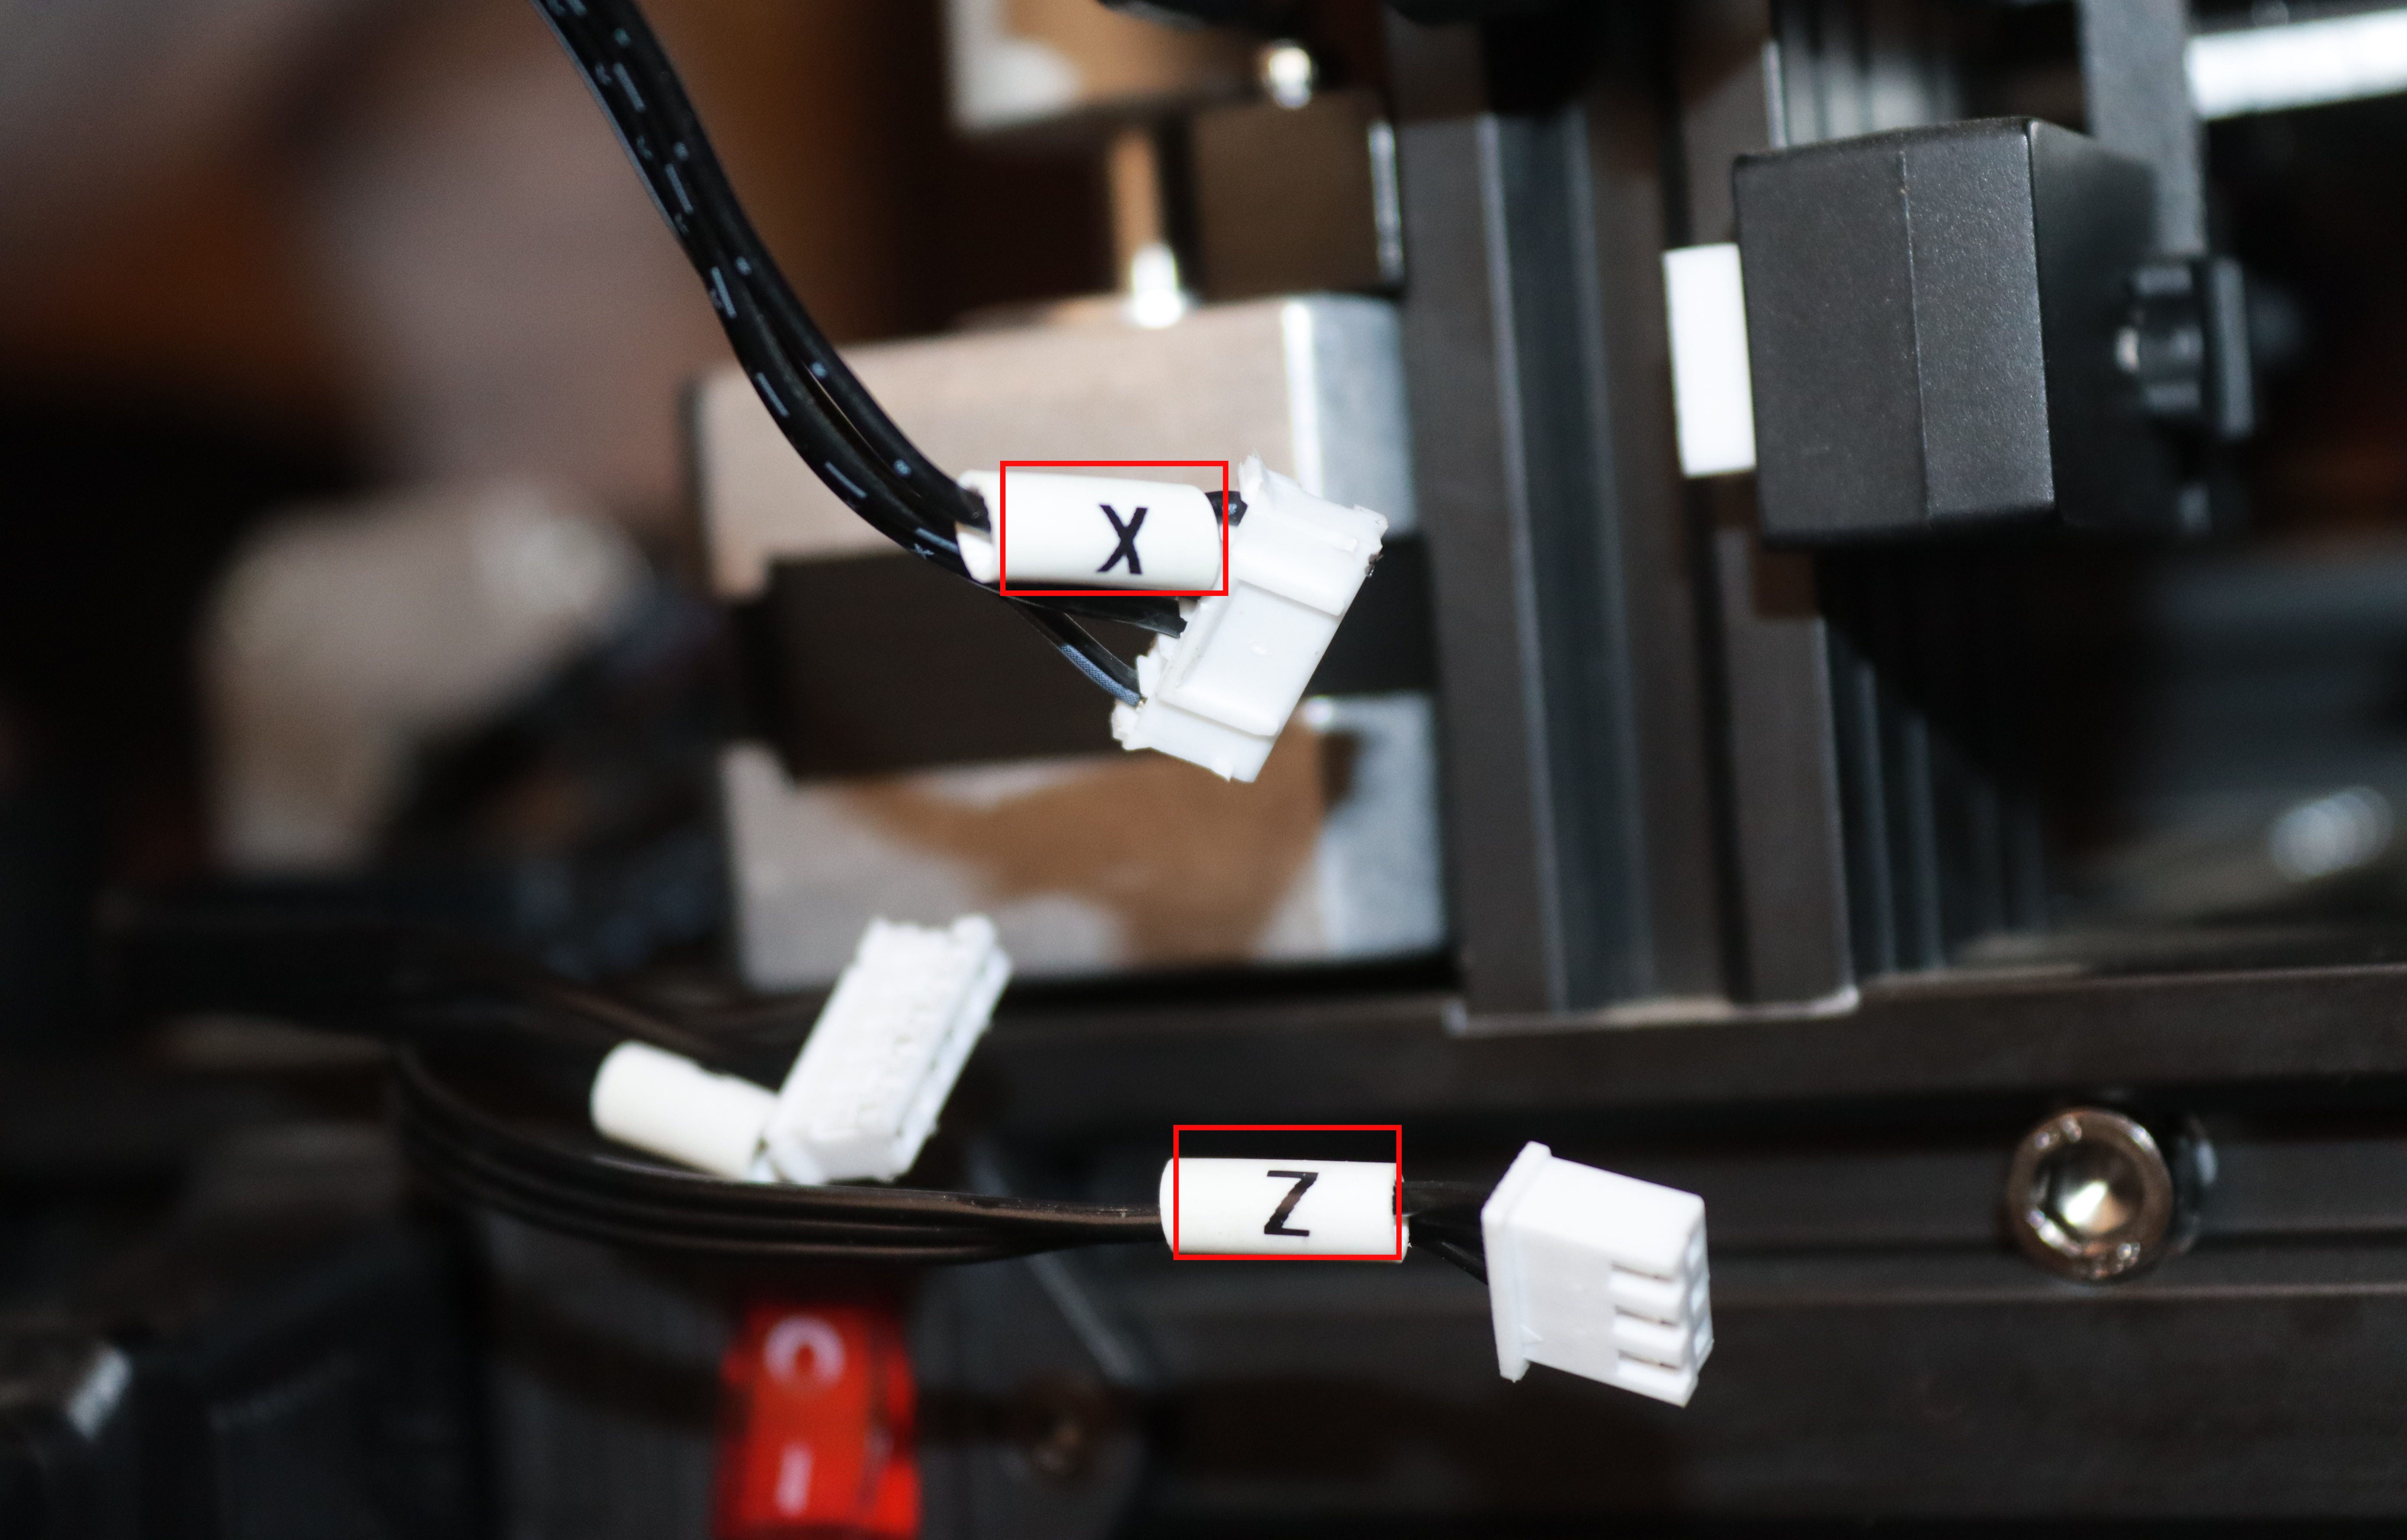 X and Z markings on the wires